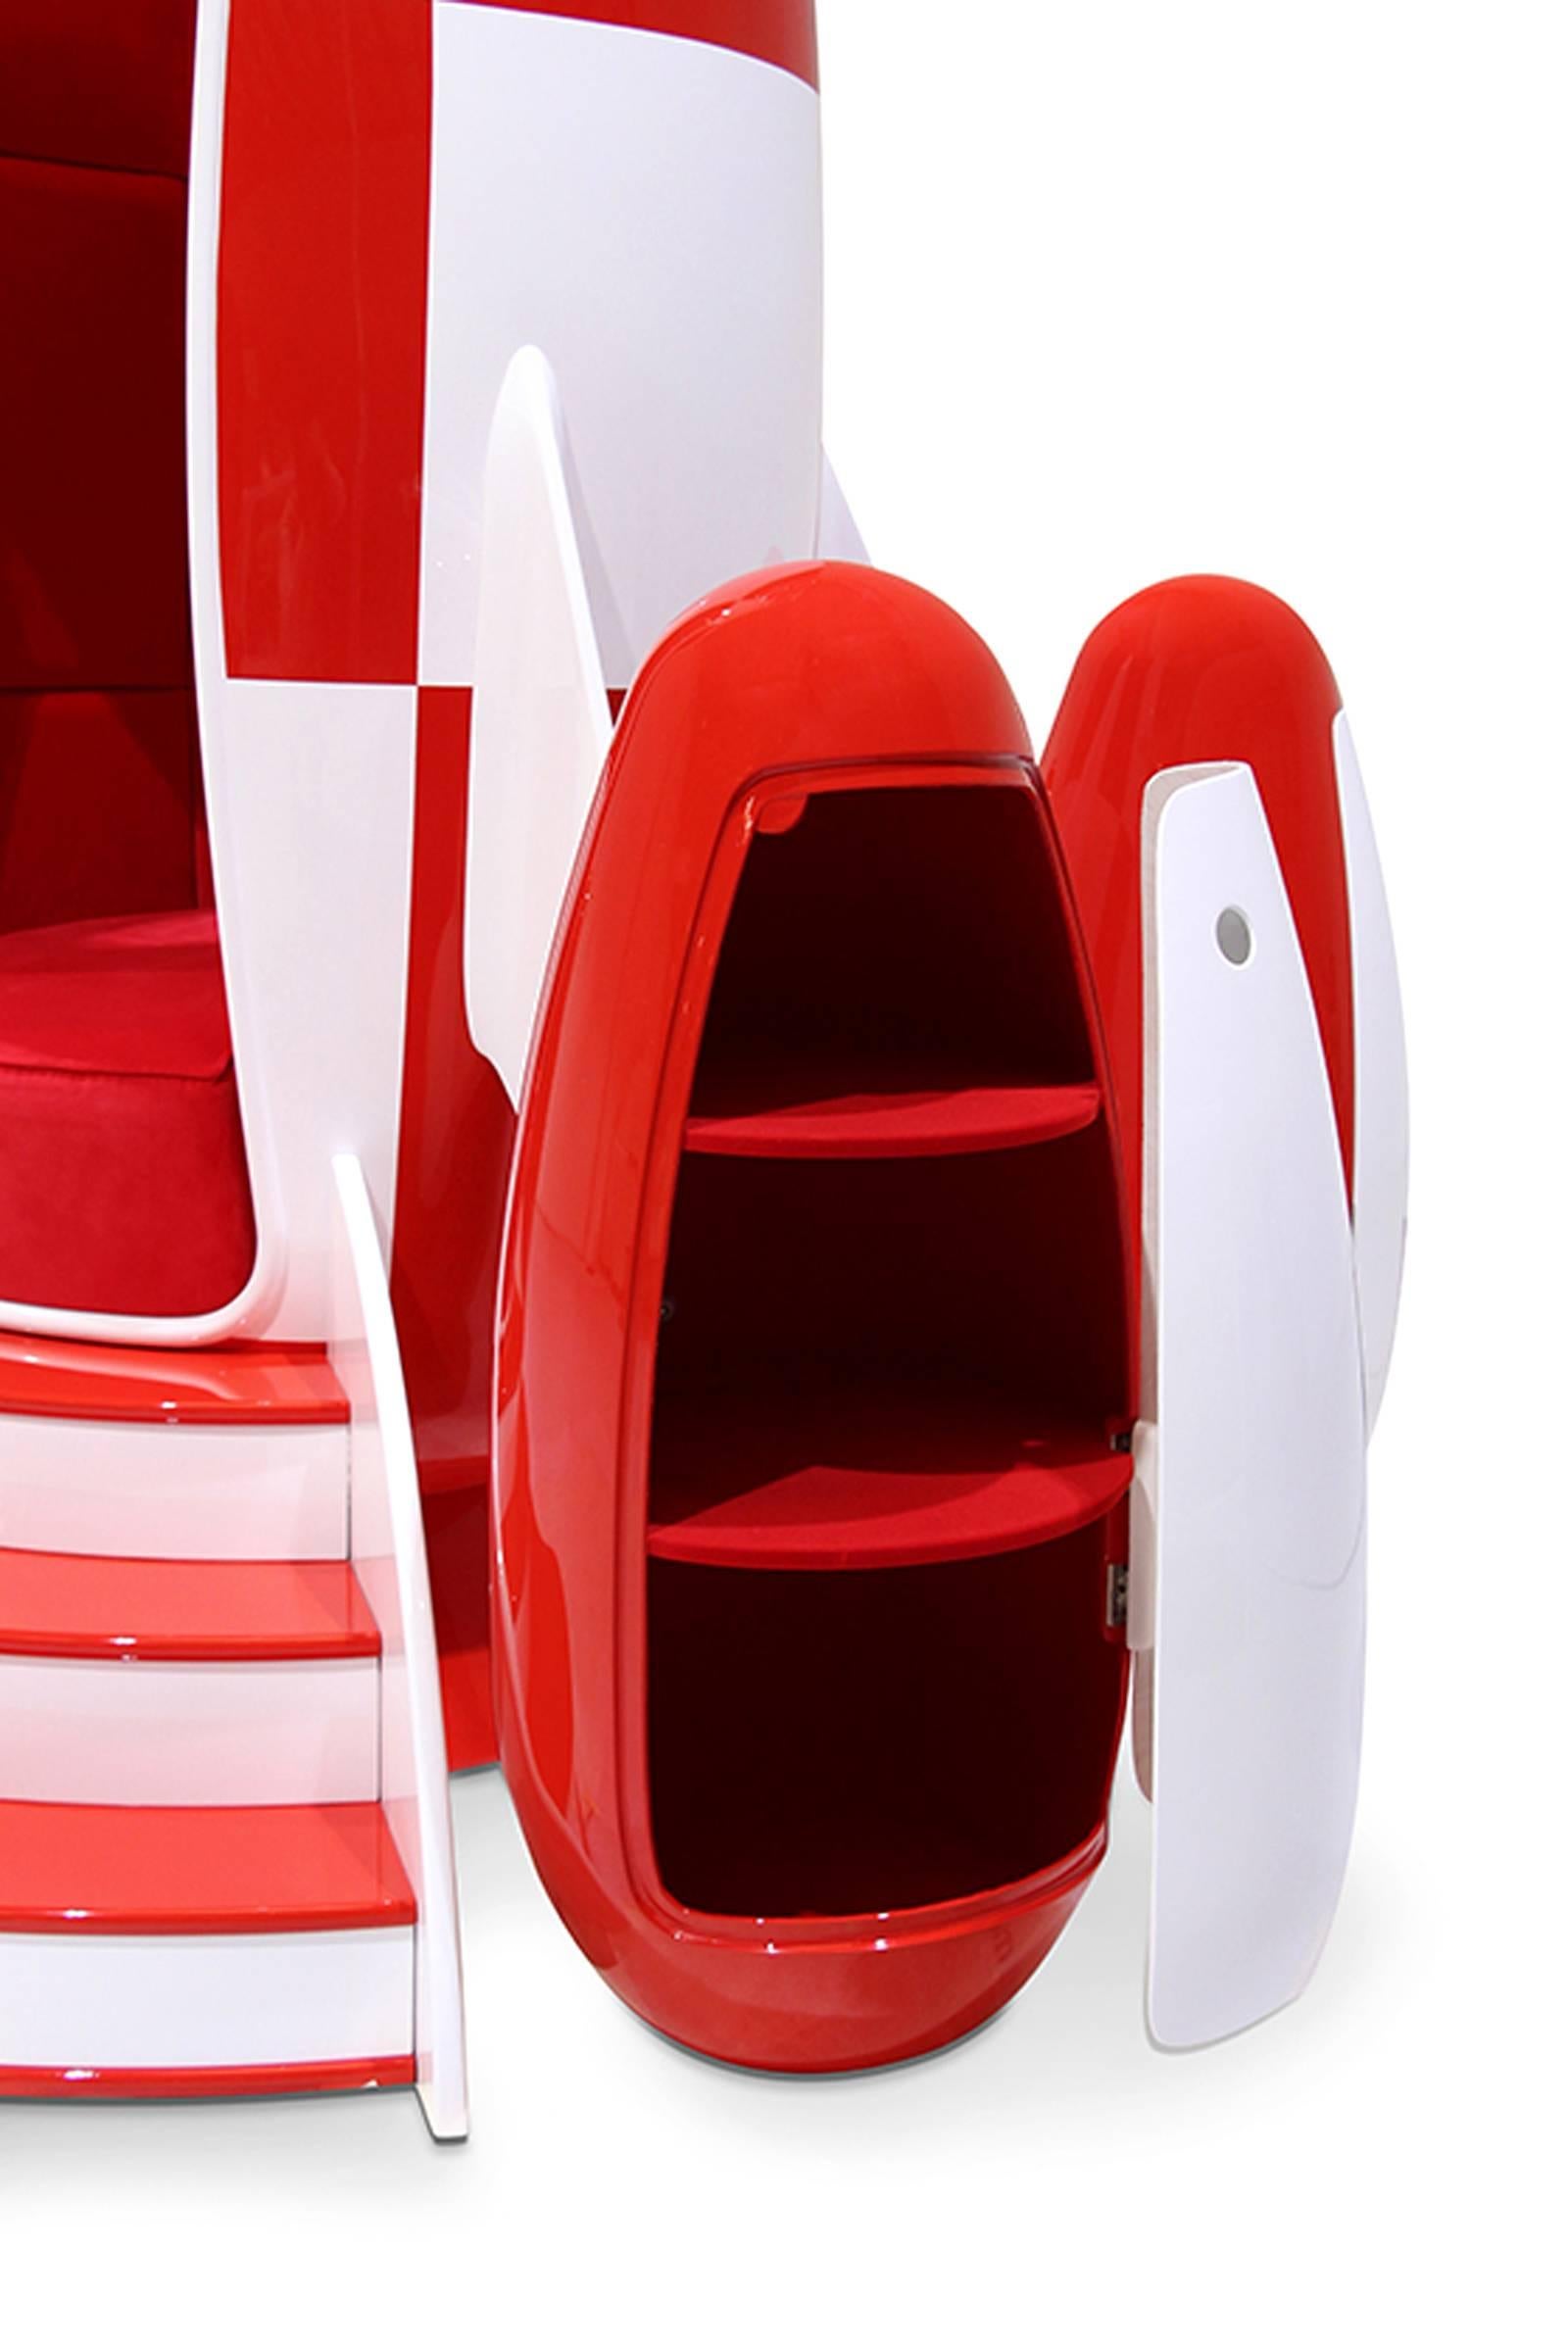 Contemporary Children Rocket Chair in Fiber Glass and Wood For Sale